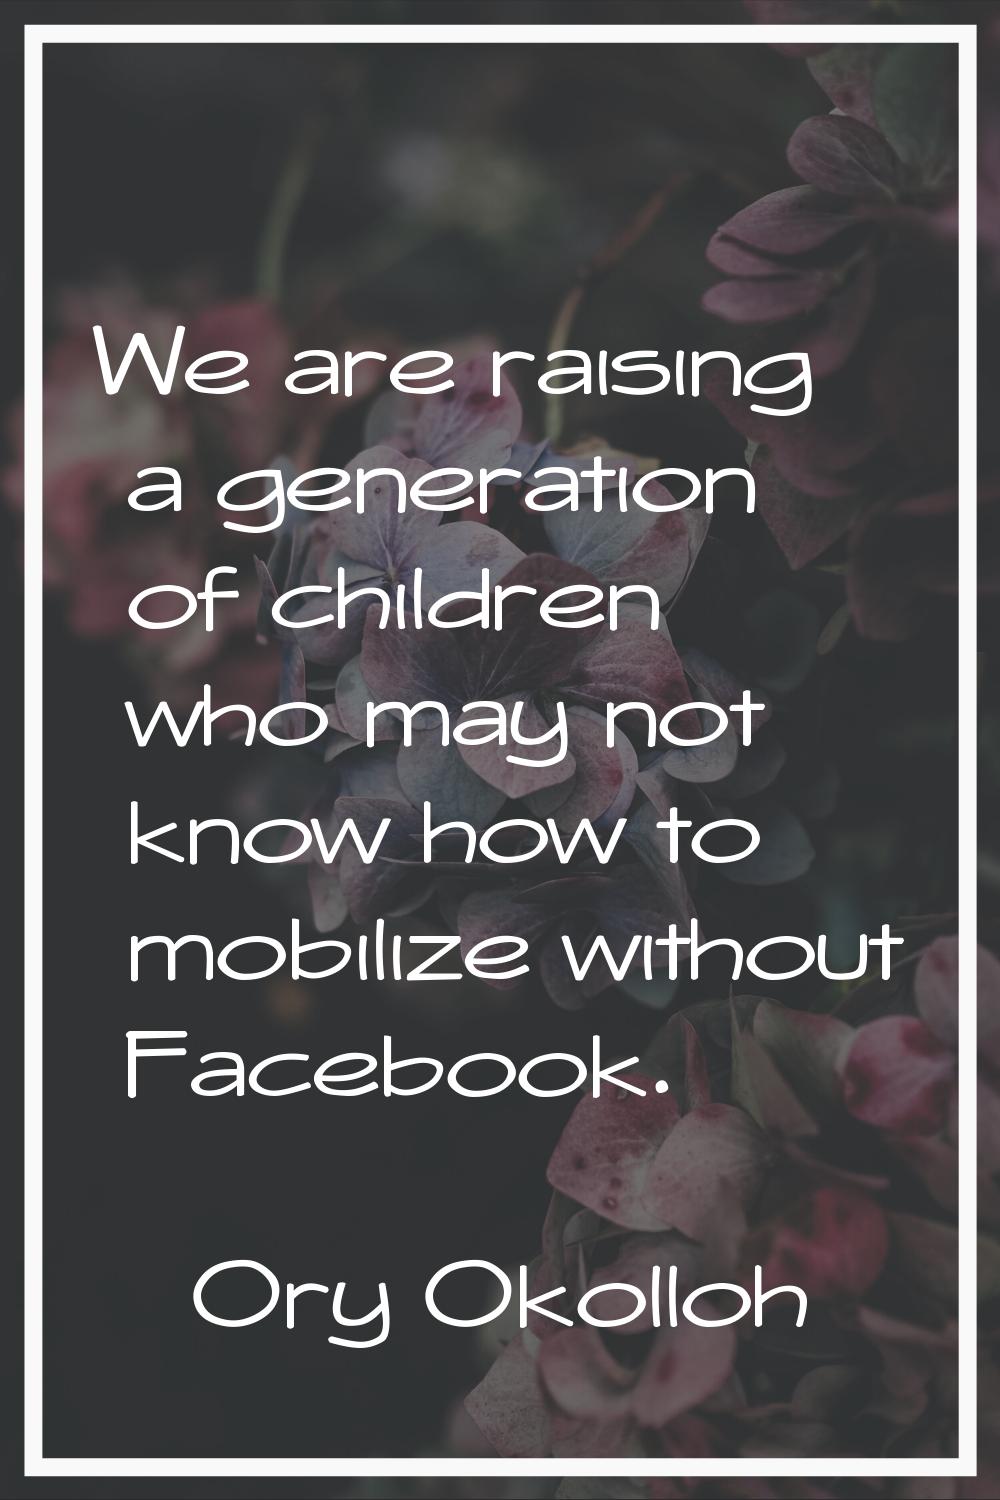 We are raising a generation of children who may not know how to mobilize without Facebook.